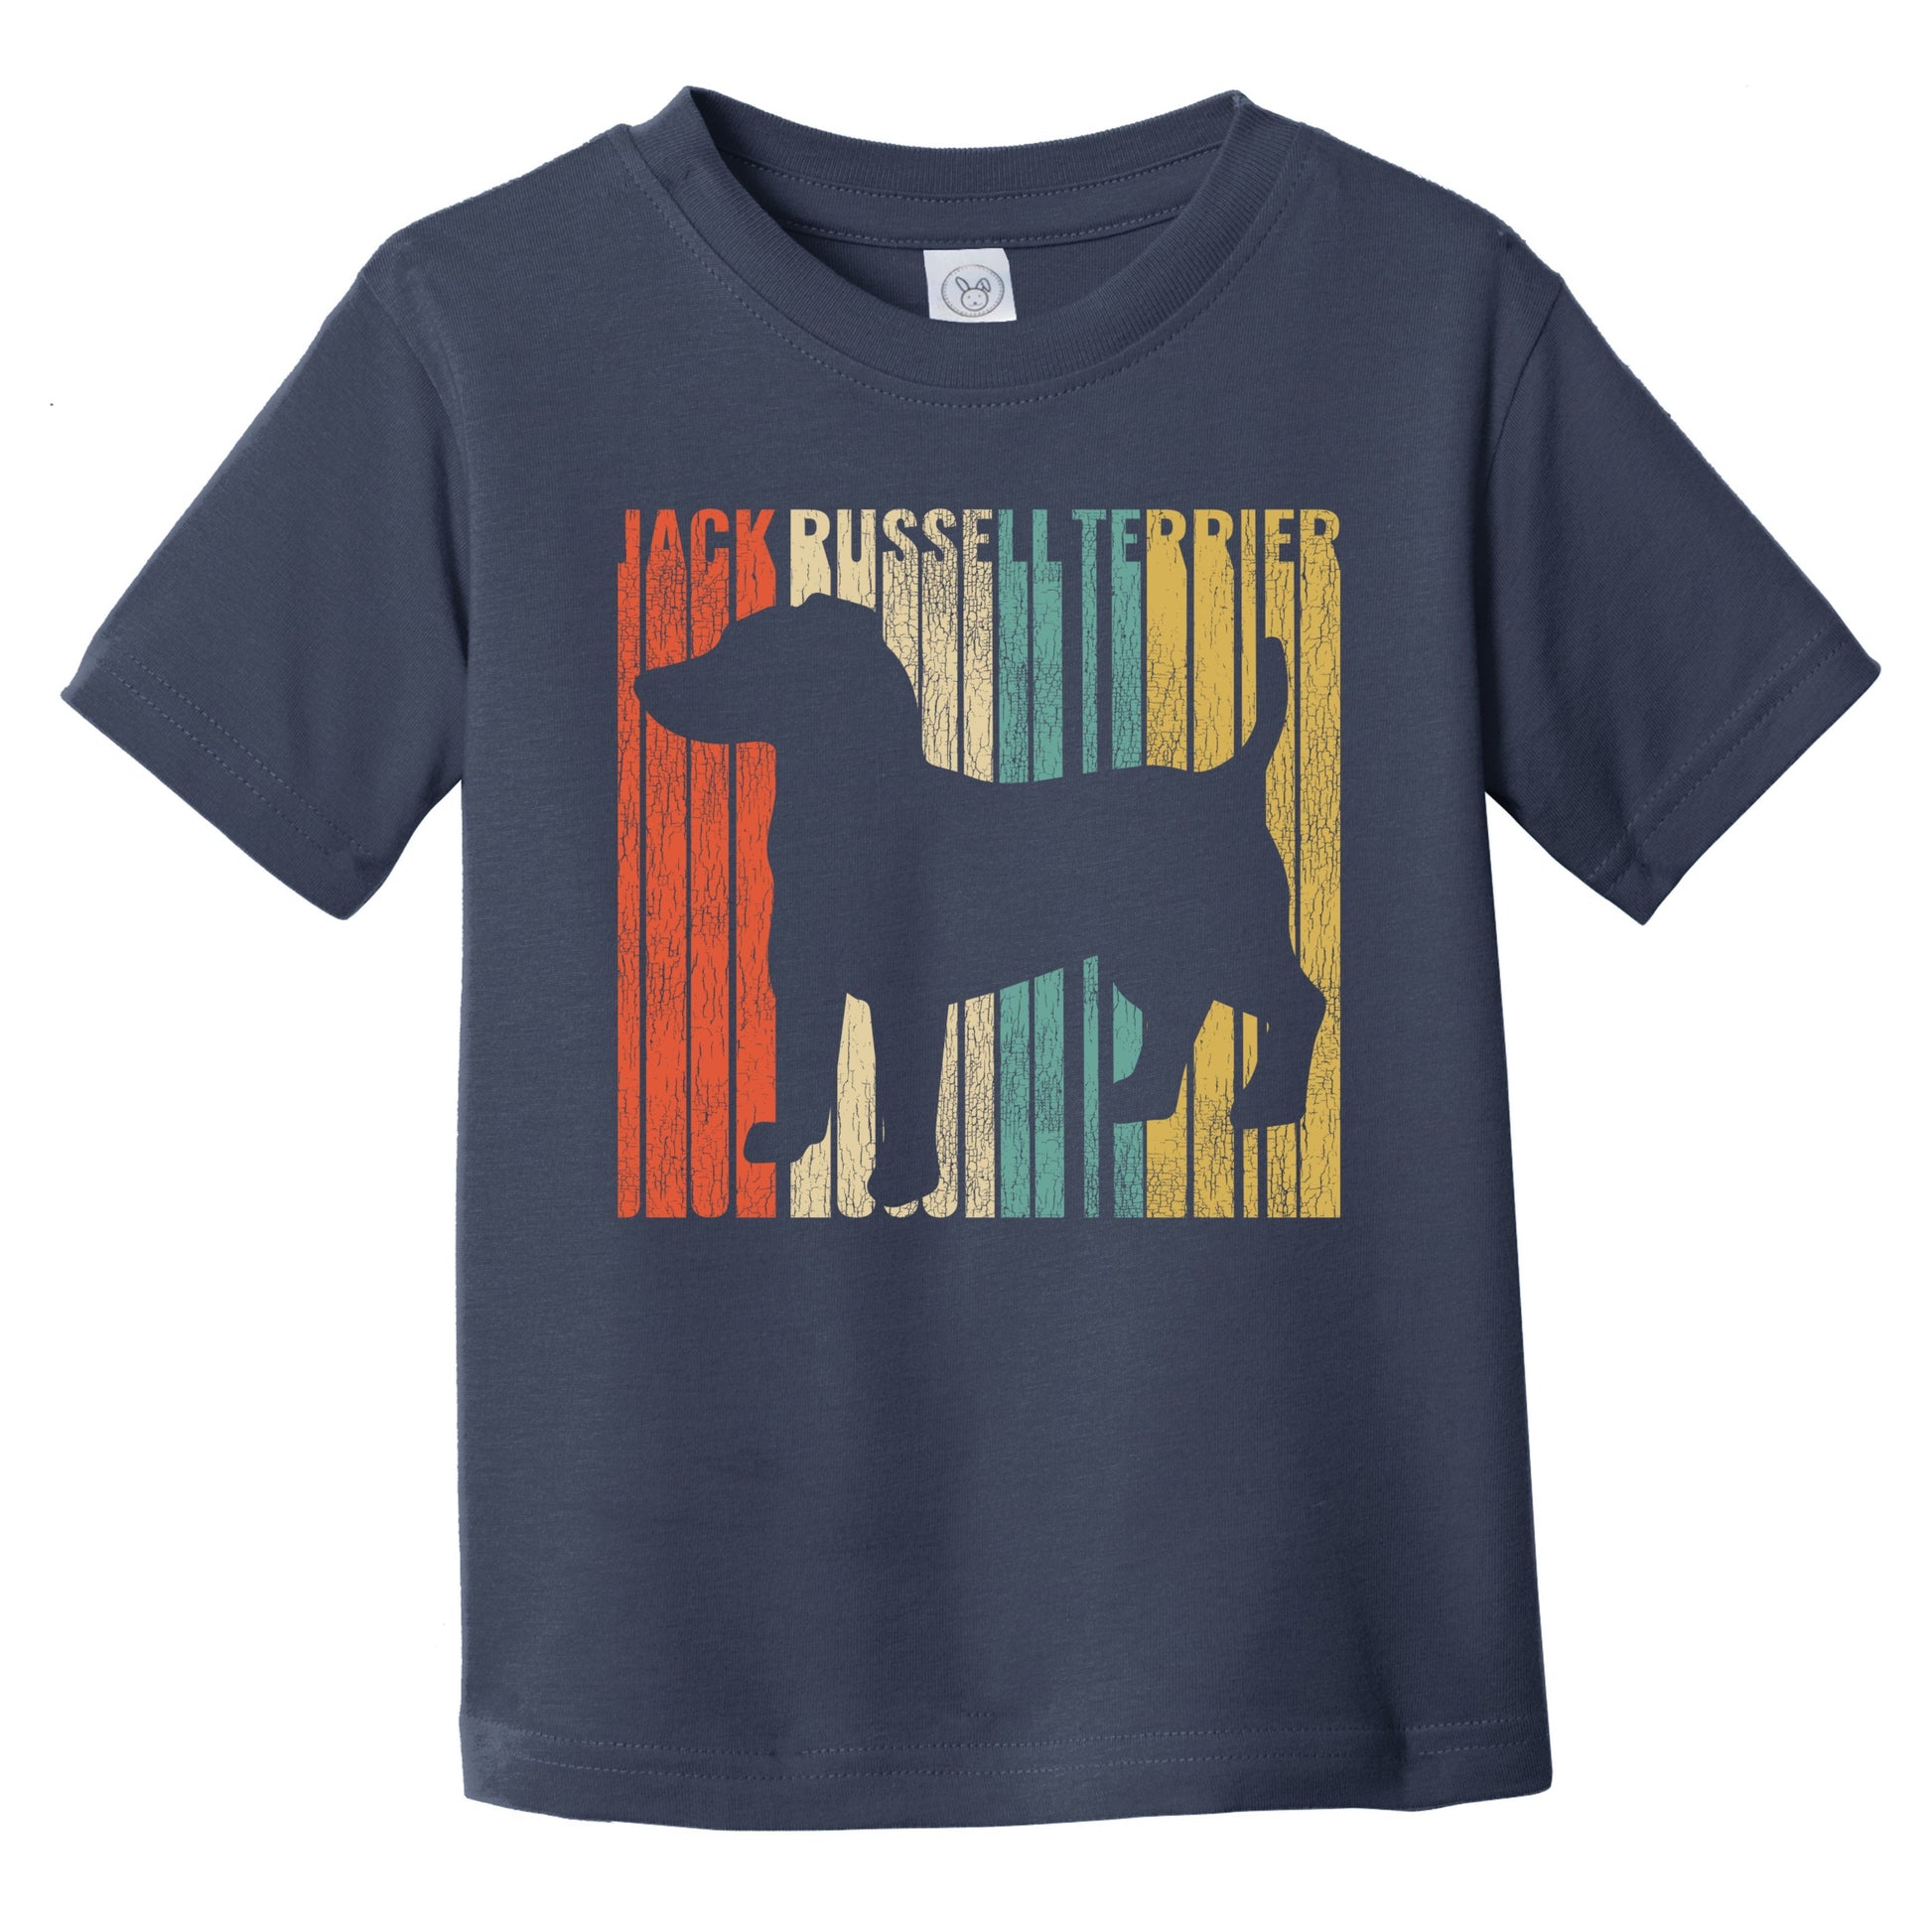 Retro Jack Russell Terrier Dog Silhouette Cracked Distressed Infant Toddler T-Shirt